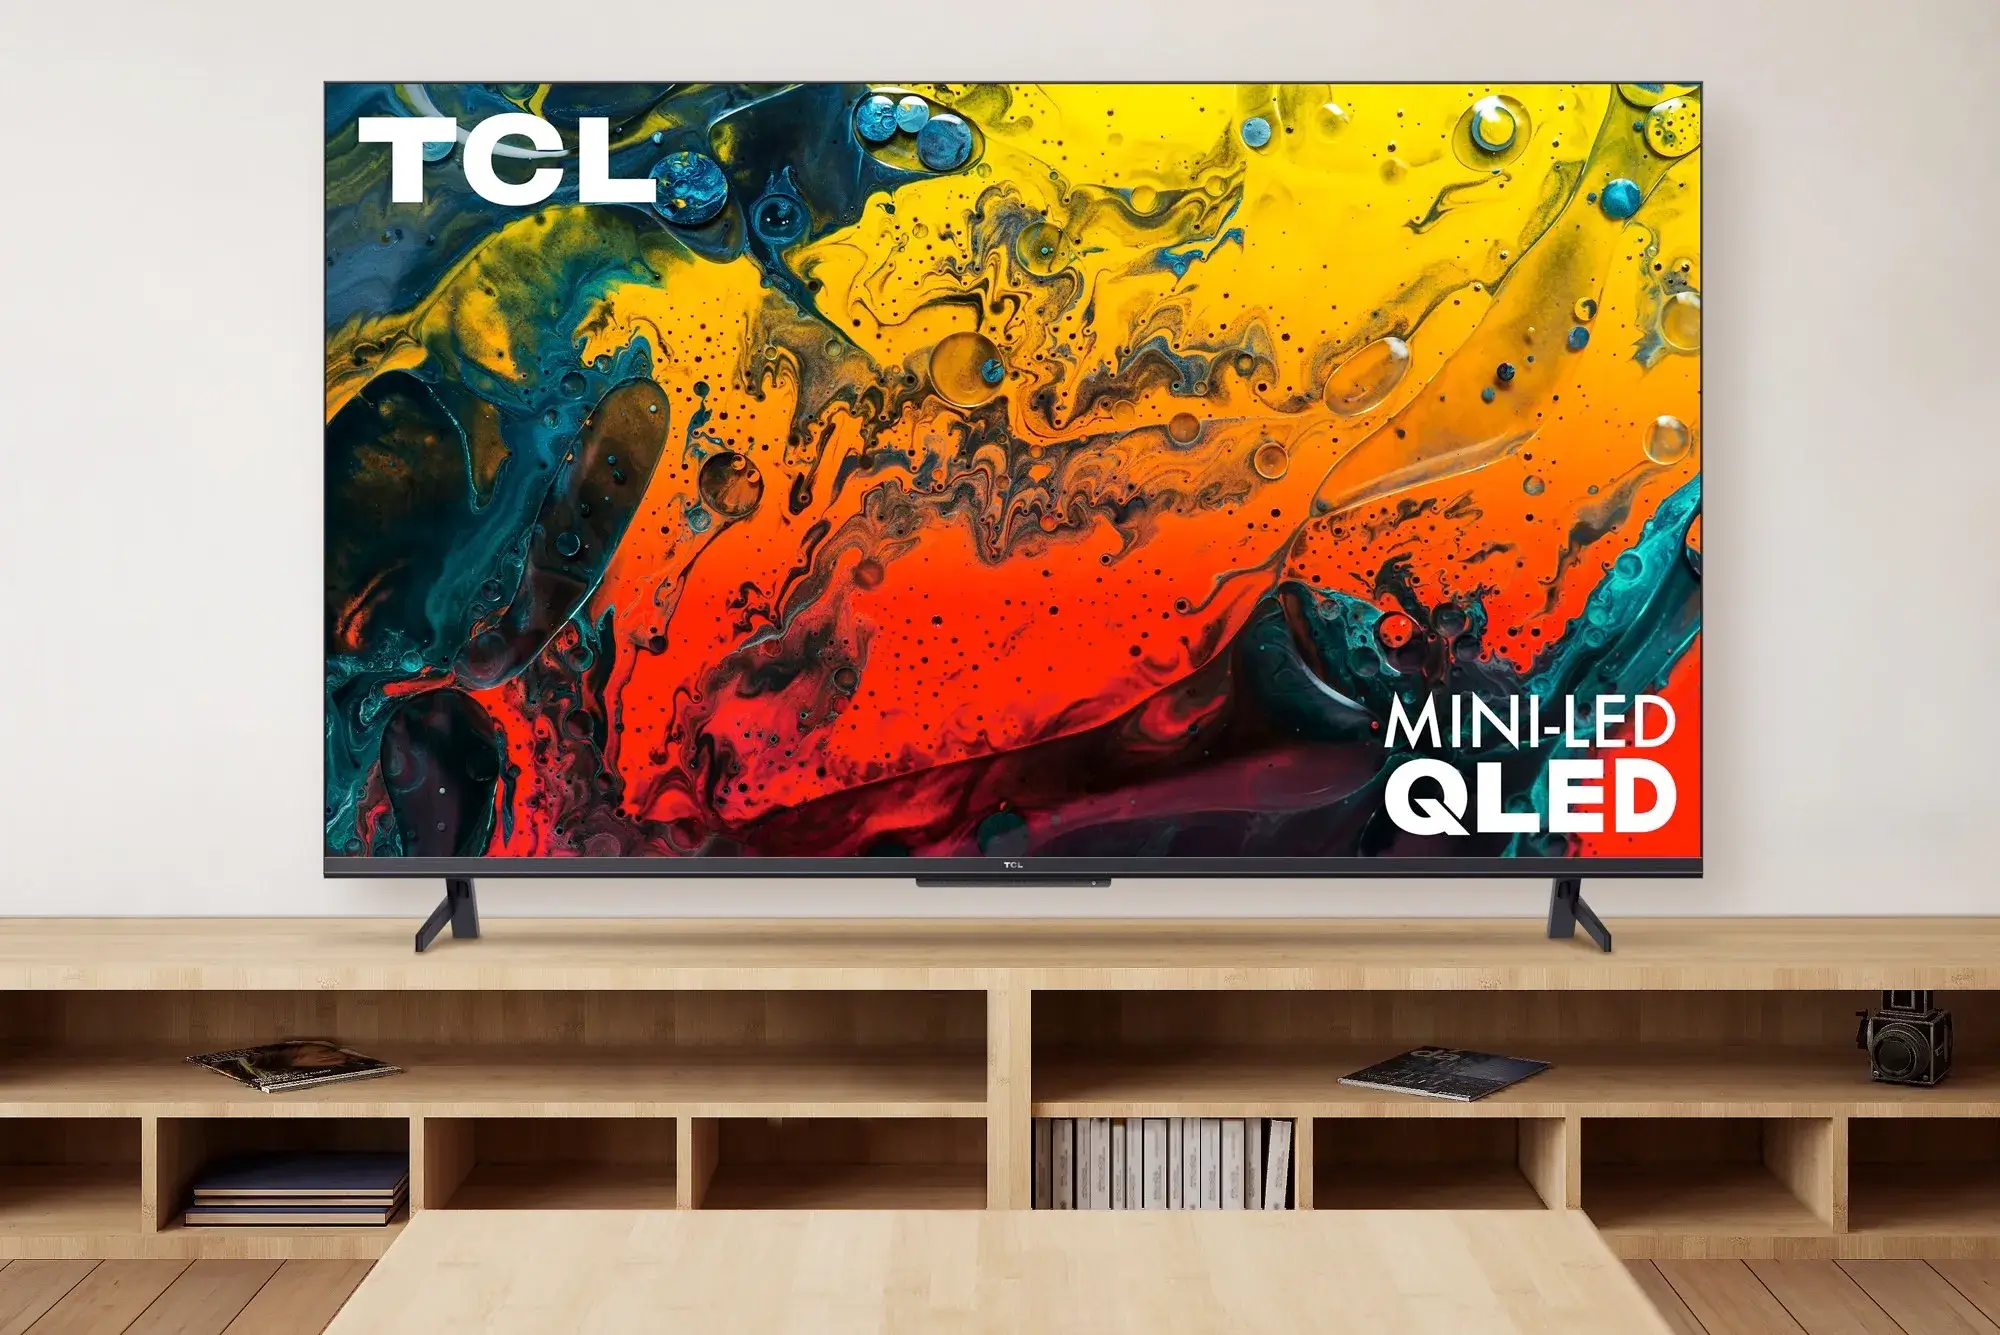 TCL 65-Inch 6-Series 4K Google TV 65R646 Review